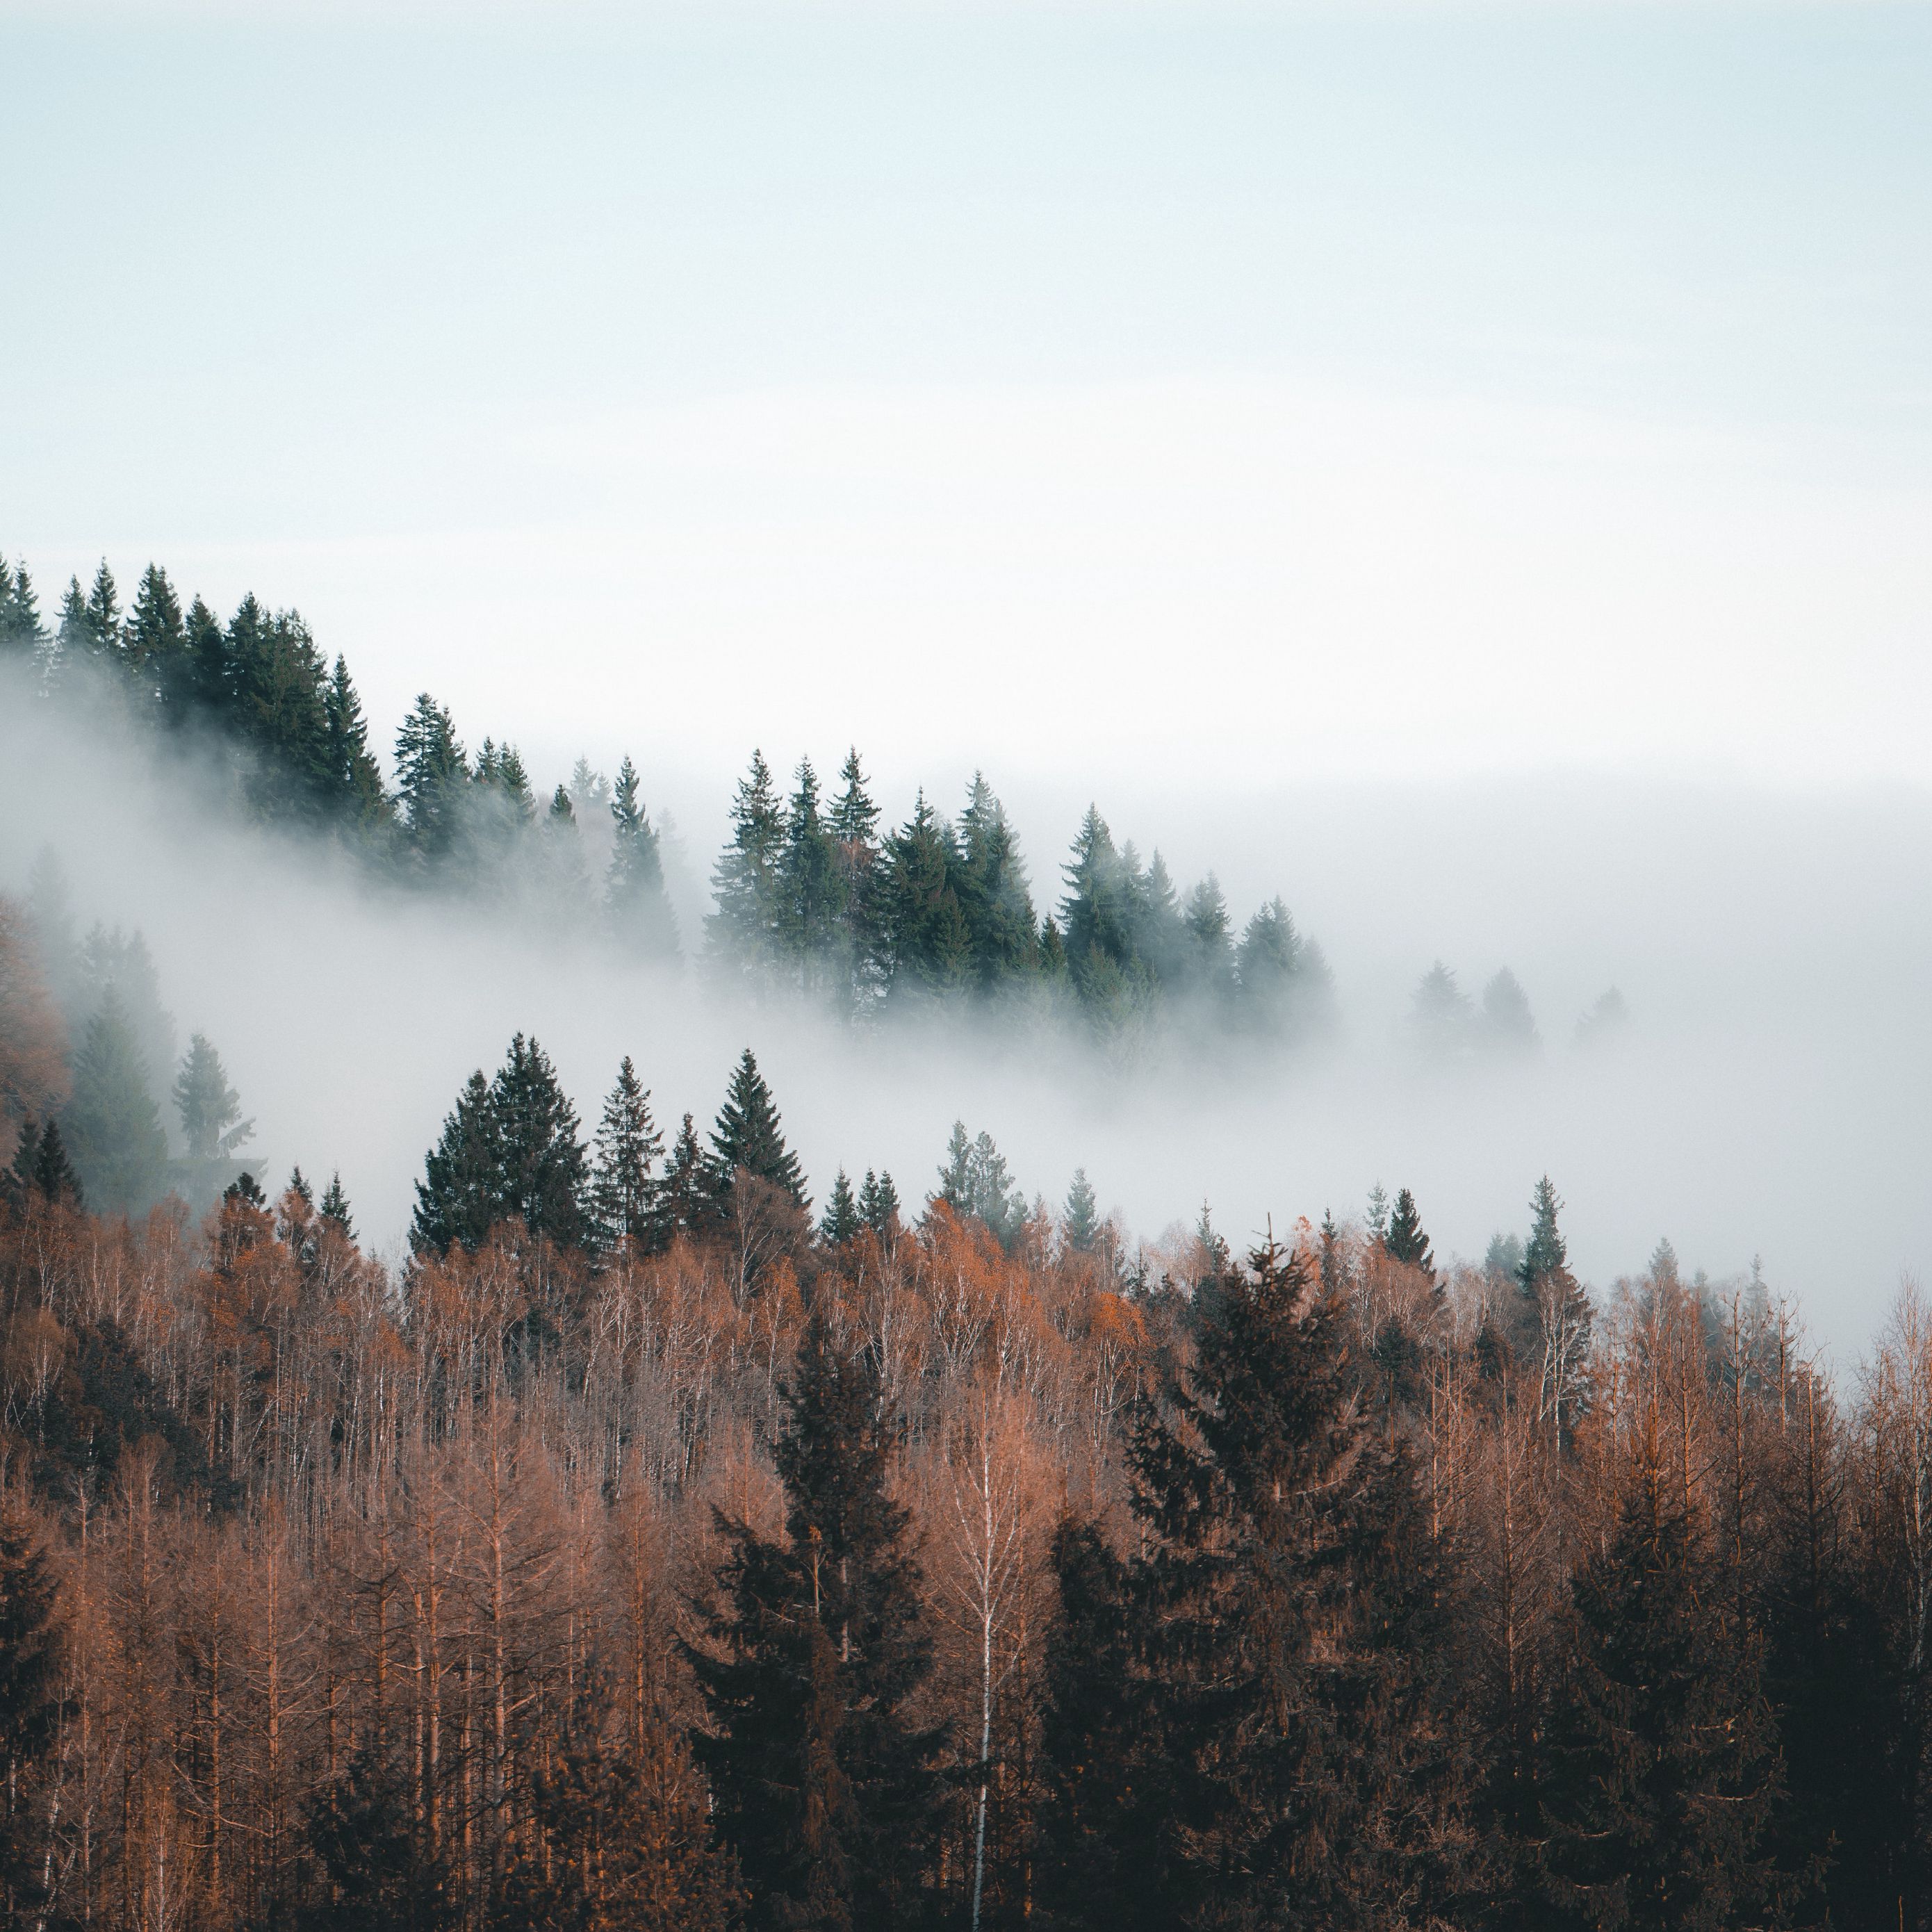 Download wallpaper 2780x2780 forest, fog, clouds, trees, landscape ipad ...